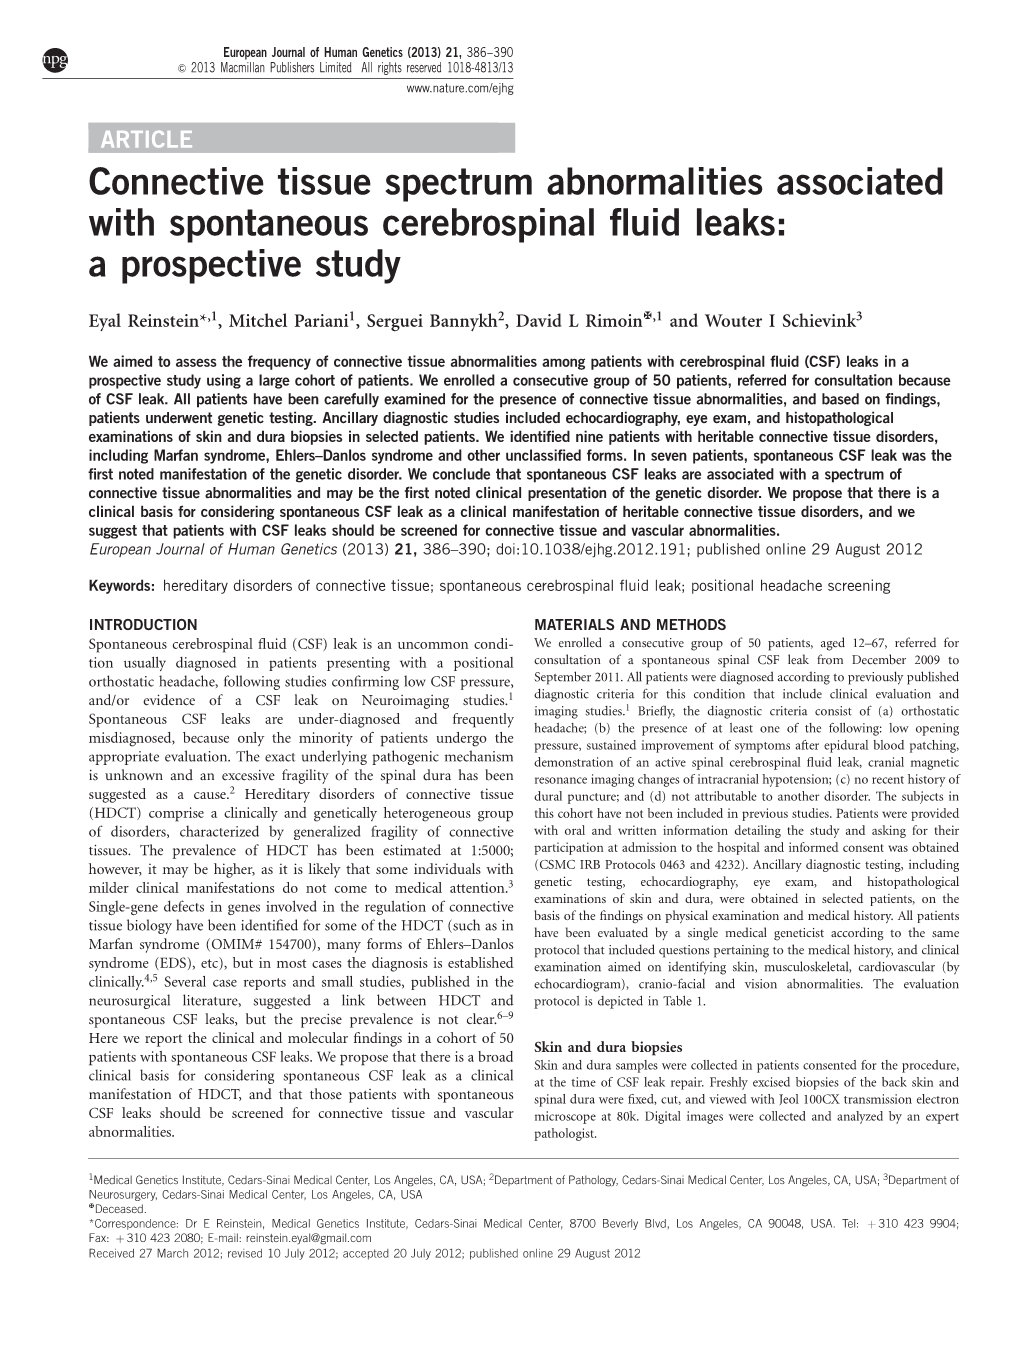 Connective Tissue Spectrum Abnormalities Associated with Spontaneous Cerebrospinal ﬂuid Leaks: a Prospective Study